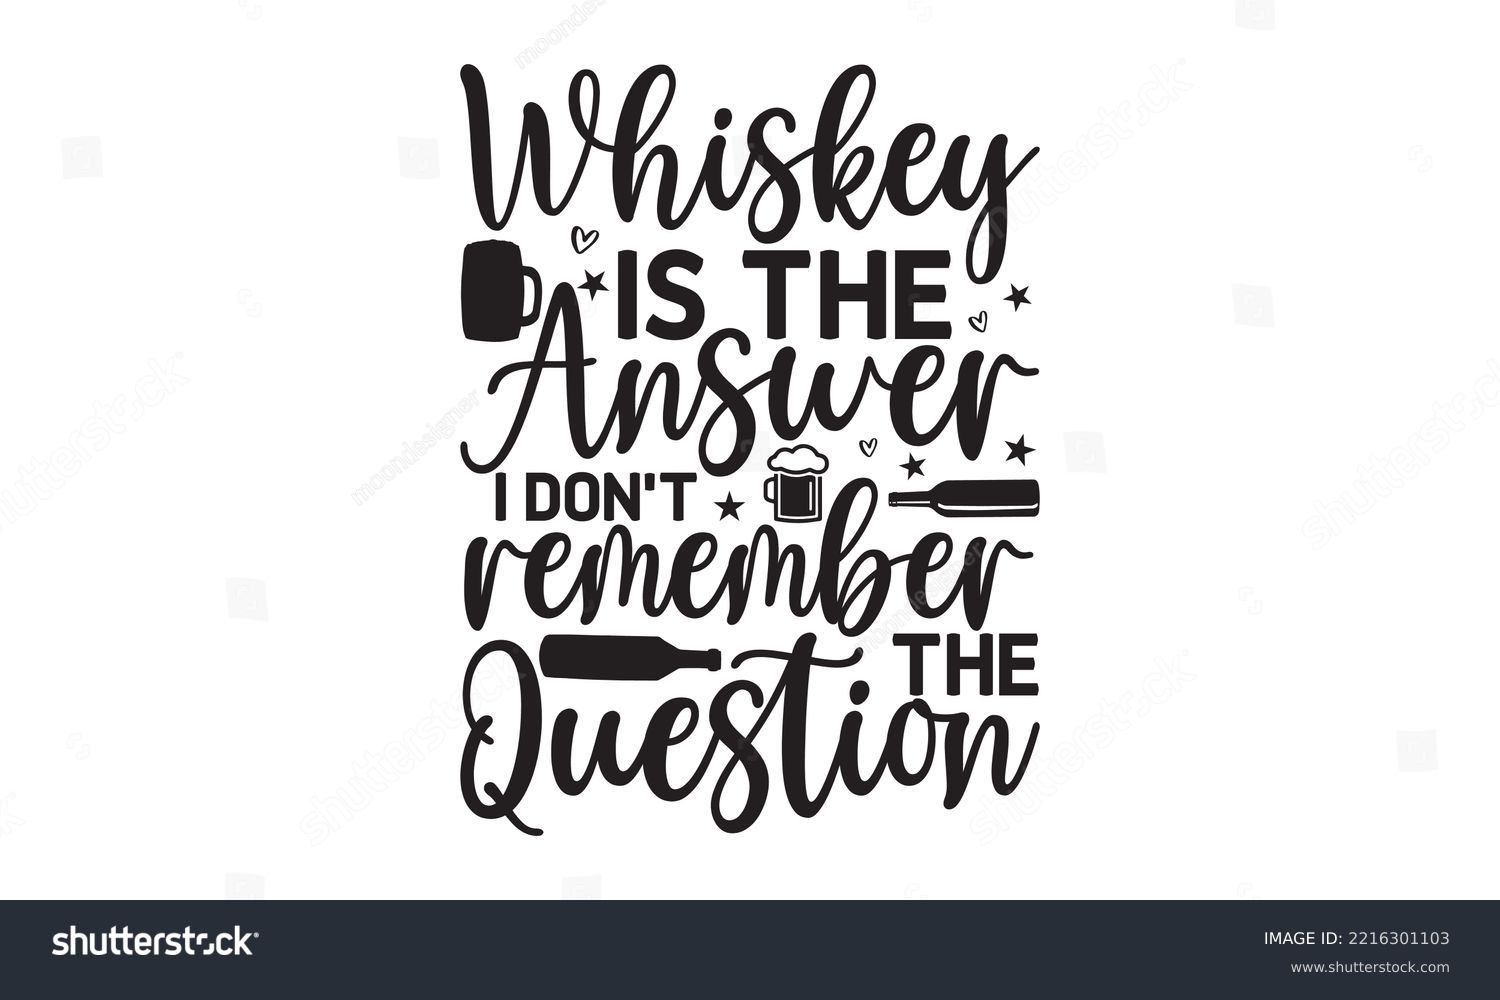 SVG of Whiskey is the answer I don’t remember the question - Alcohol SVG T Shirt design, Girl Beer Design, Prost, Pretzels and Beer, Vector EPS Editable Files, Alcohol funny quotes, Oktoberfest Alcohol SVG  svg